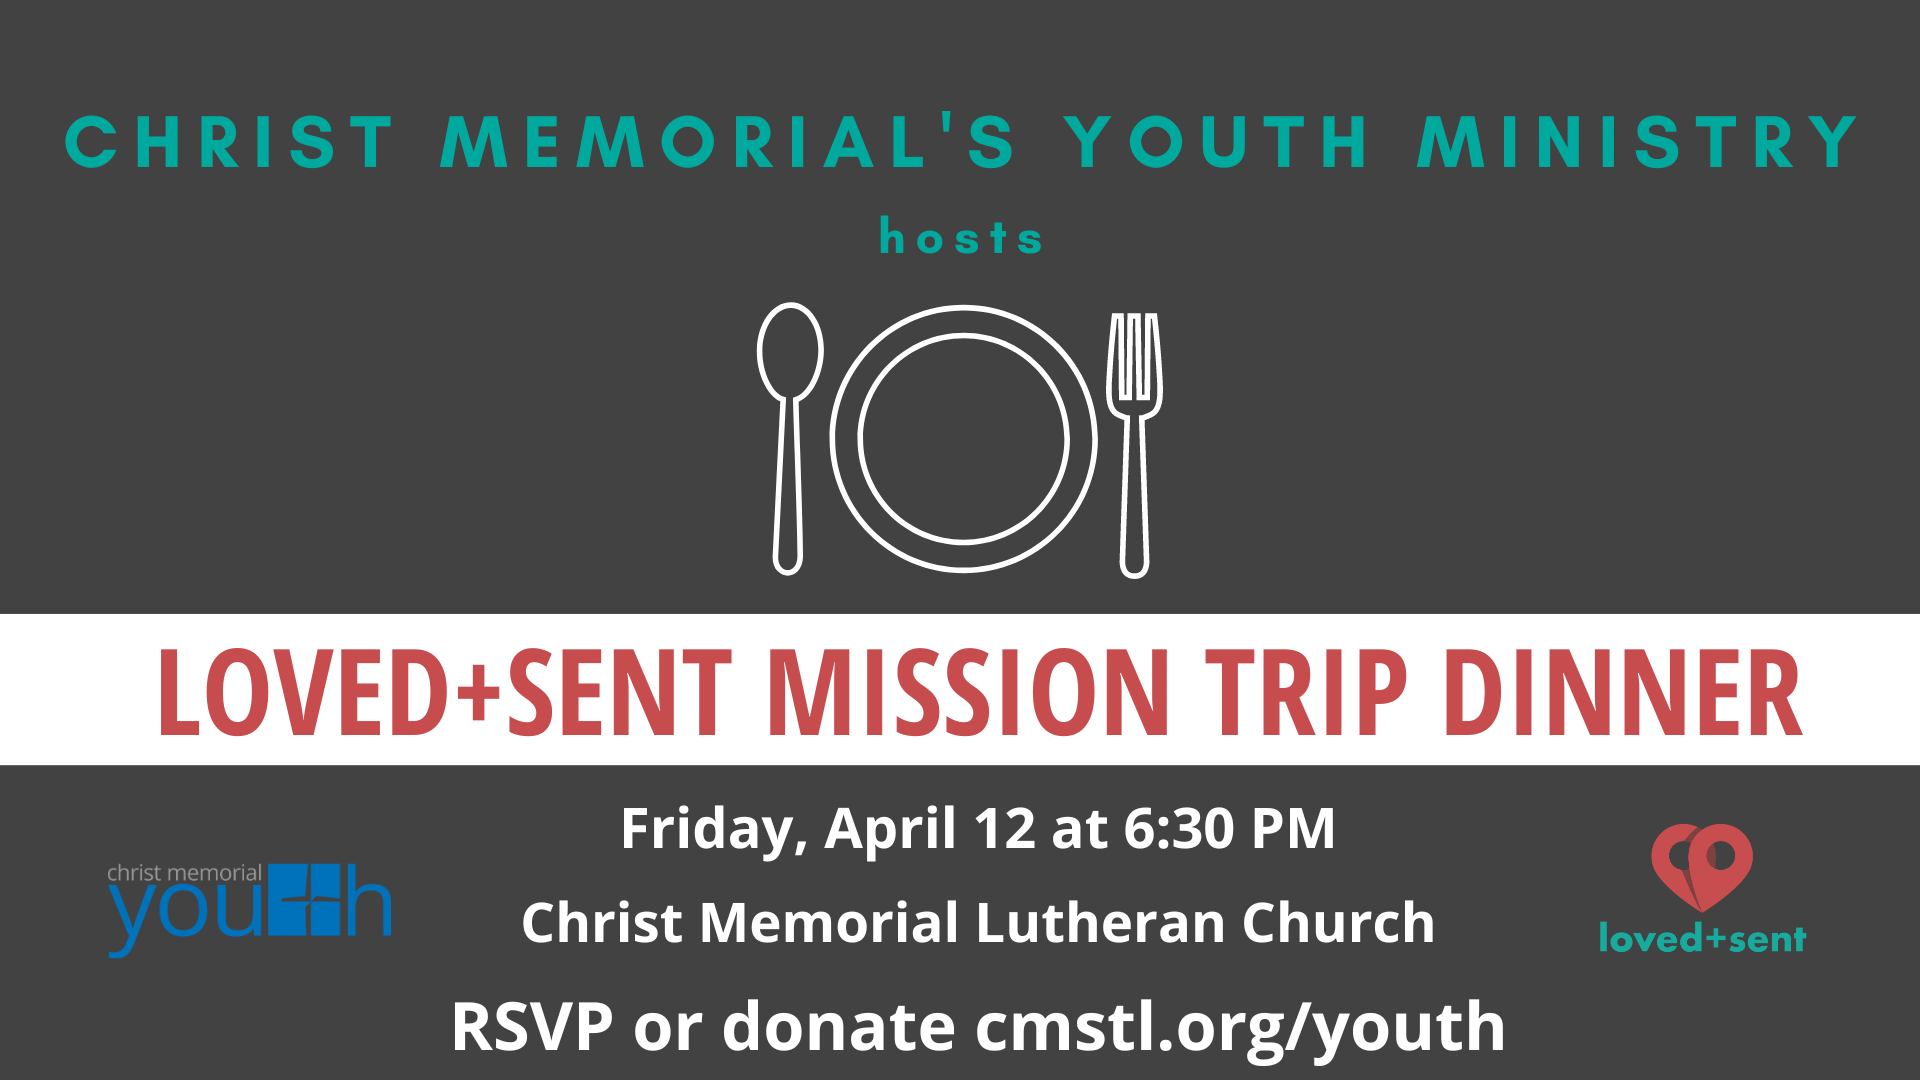 Loved+sent Mission trip April 12 at 6:30 pm hosting a fundraising meal